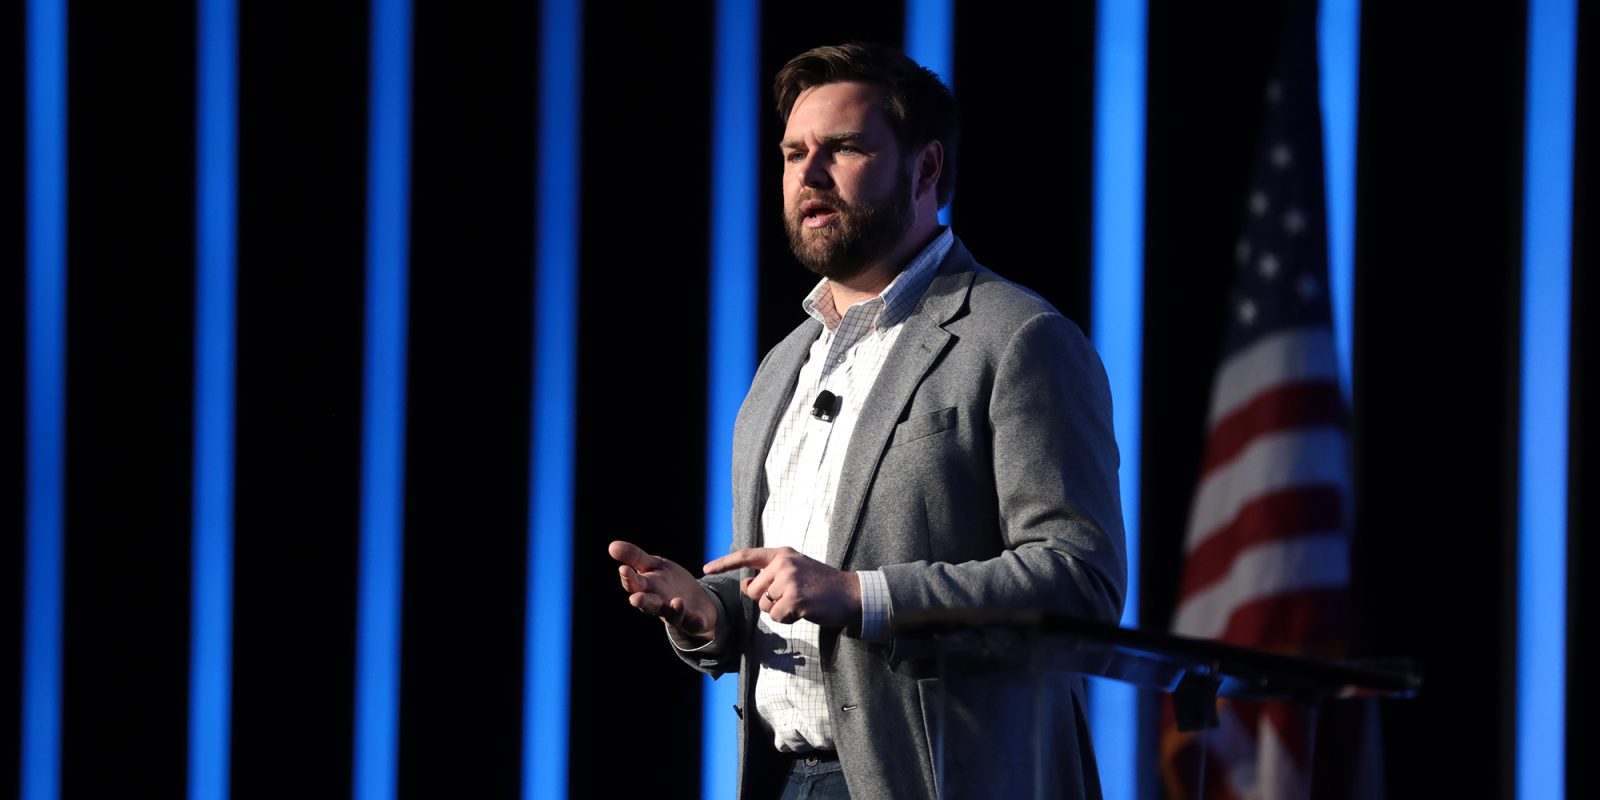 JD Vance Venmo connections public | Vance speaking at a conference